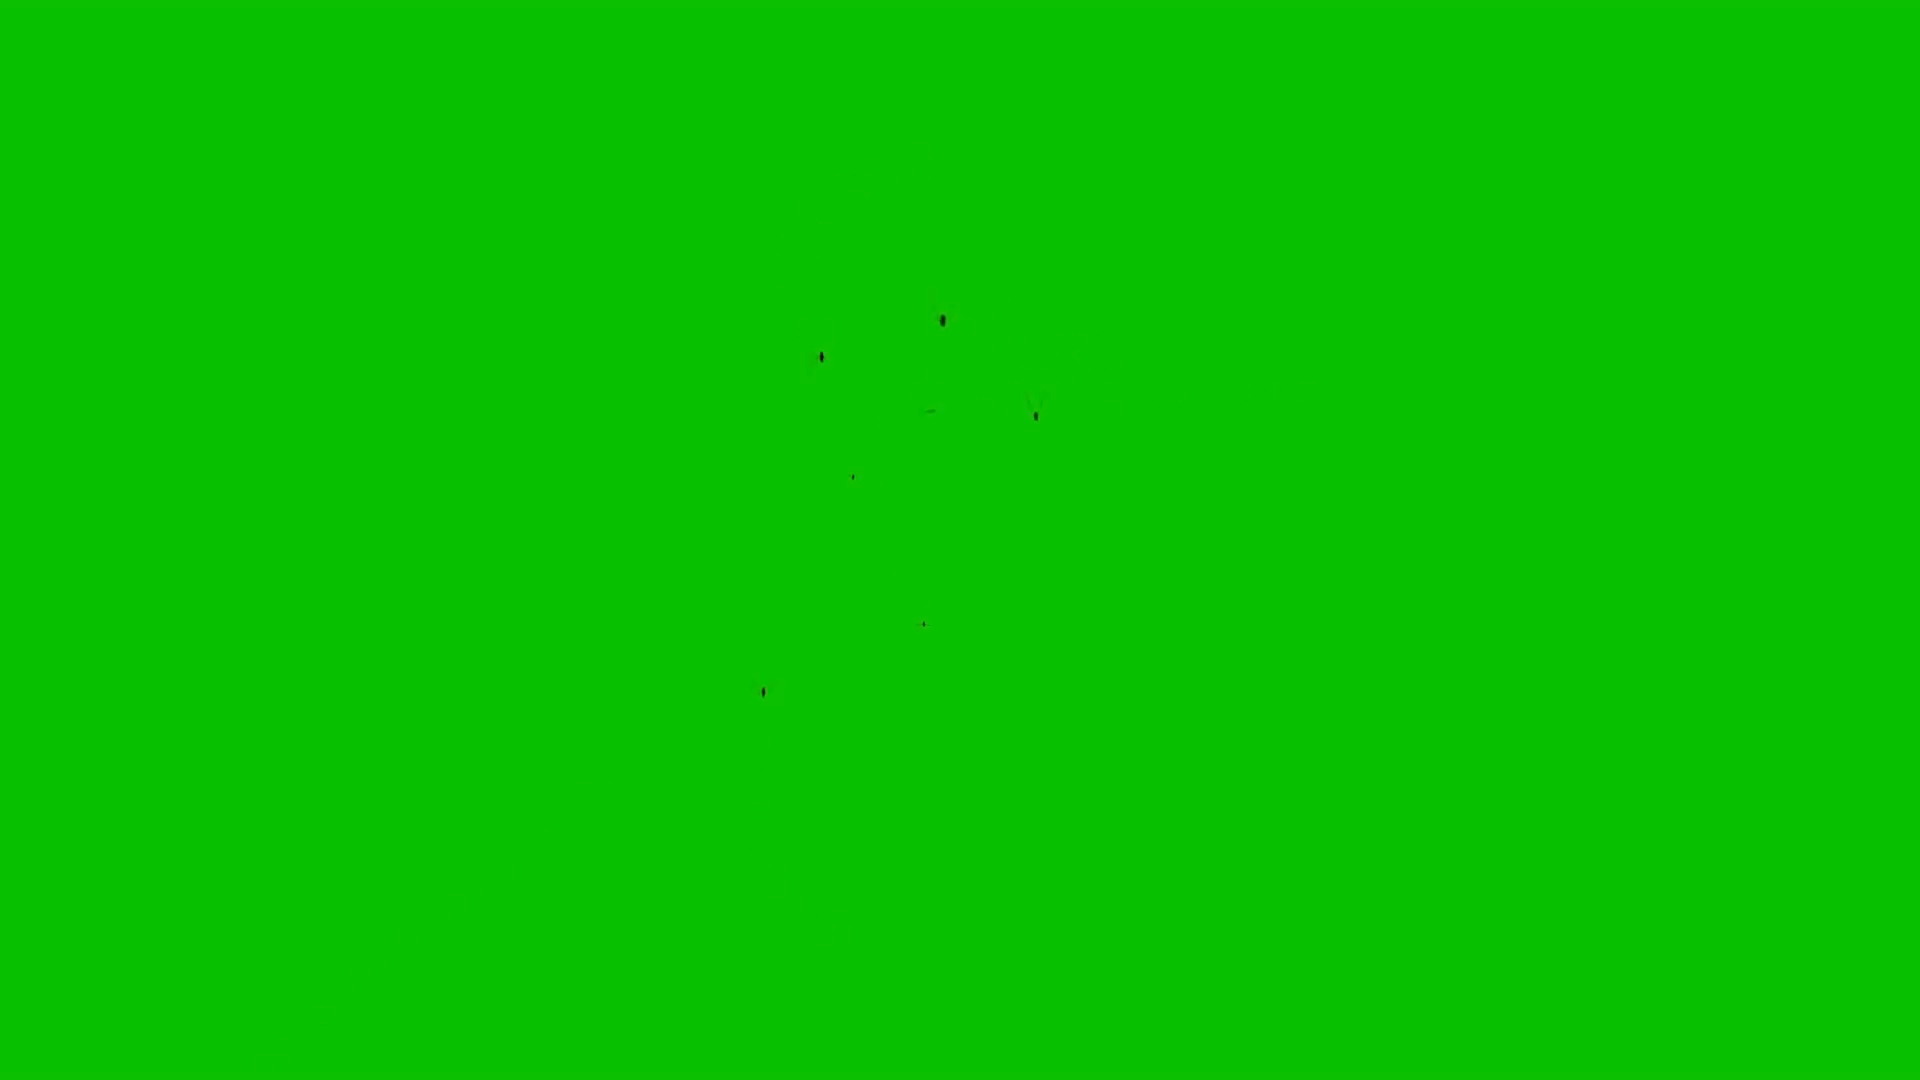 Download free background green screen png for your next project